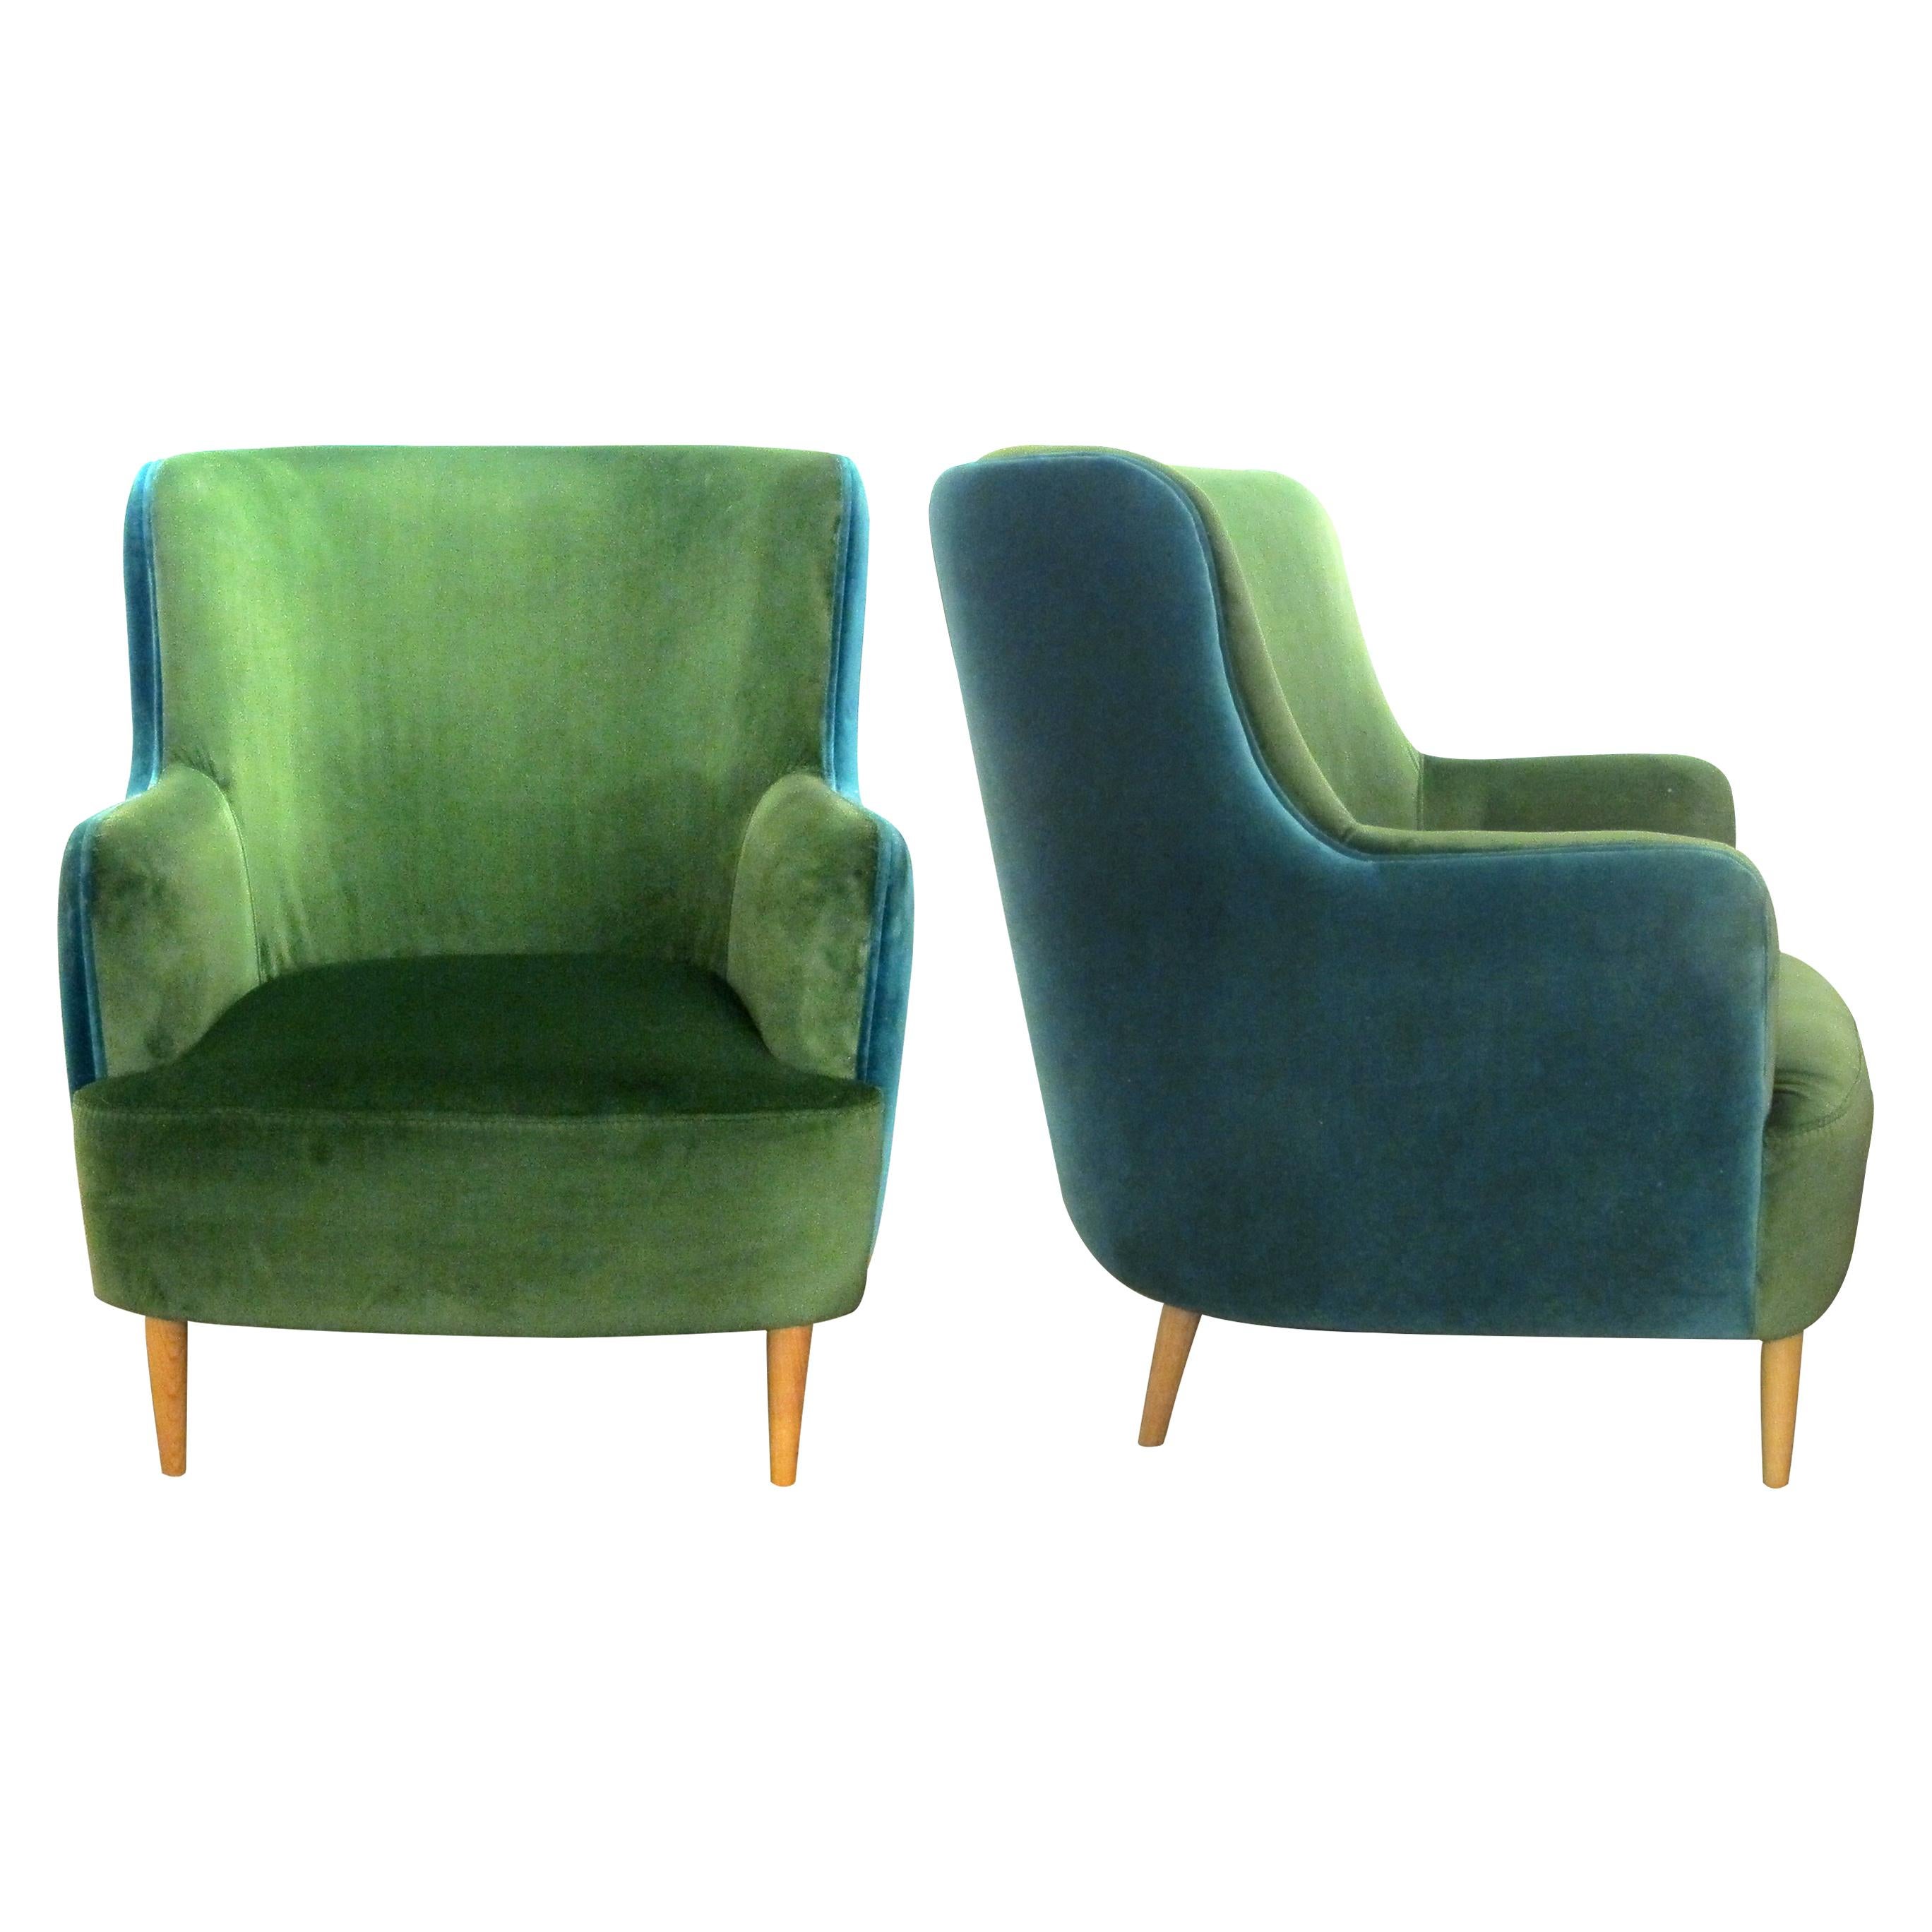 A beautiful pair of custom-made, two-tone, deep-seated and high-backed lounge or armchairs which have been reupholstered in a contrasting green fabric on the arms, seat and and front with the same fabric but in turquoise on the back. The